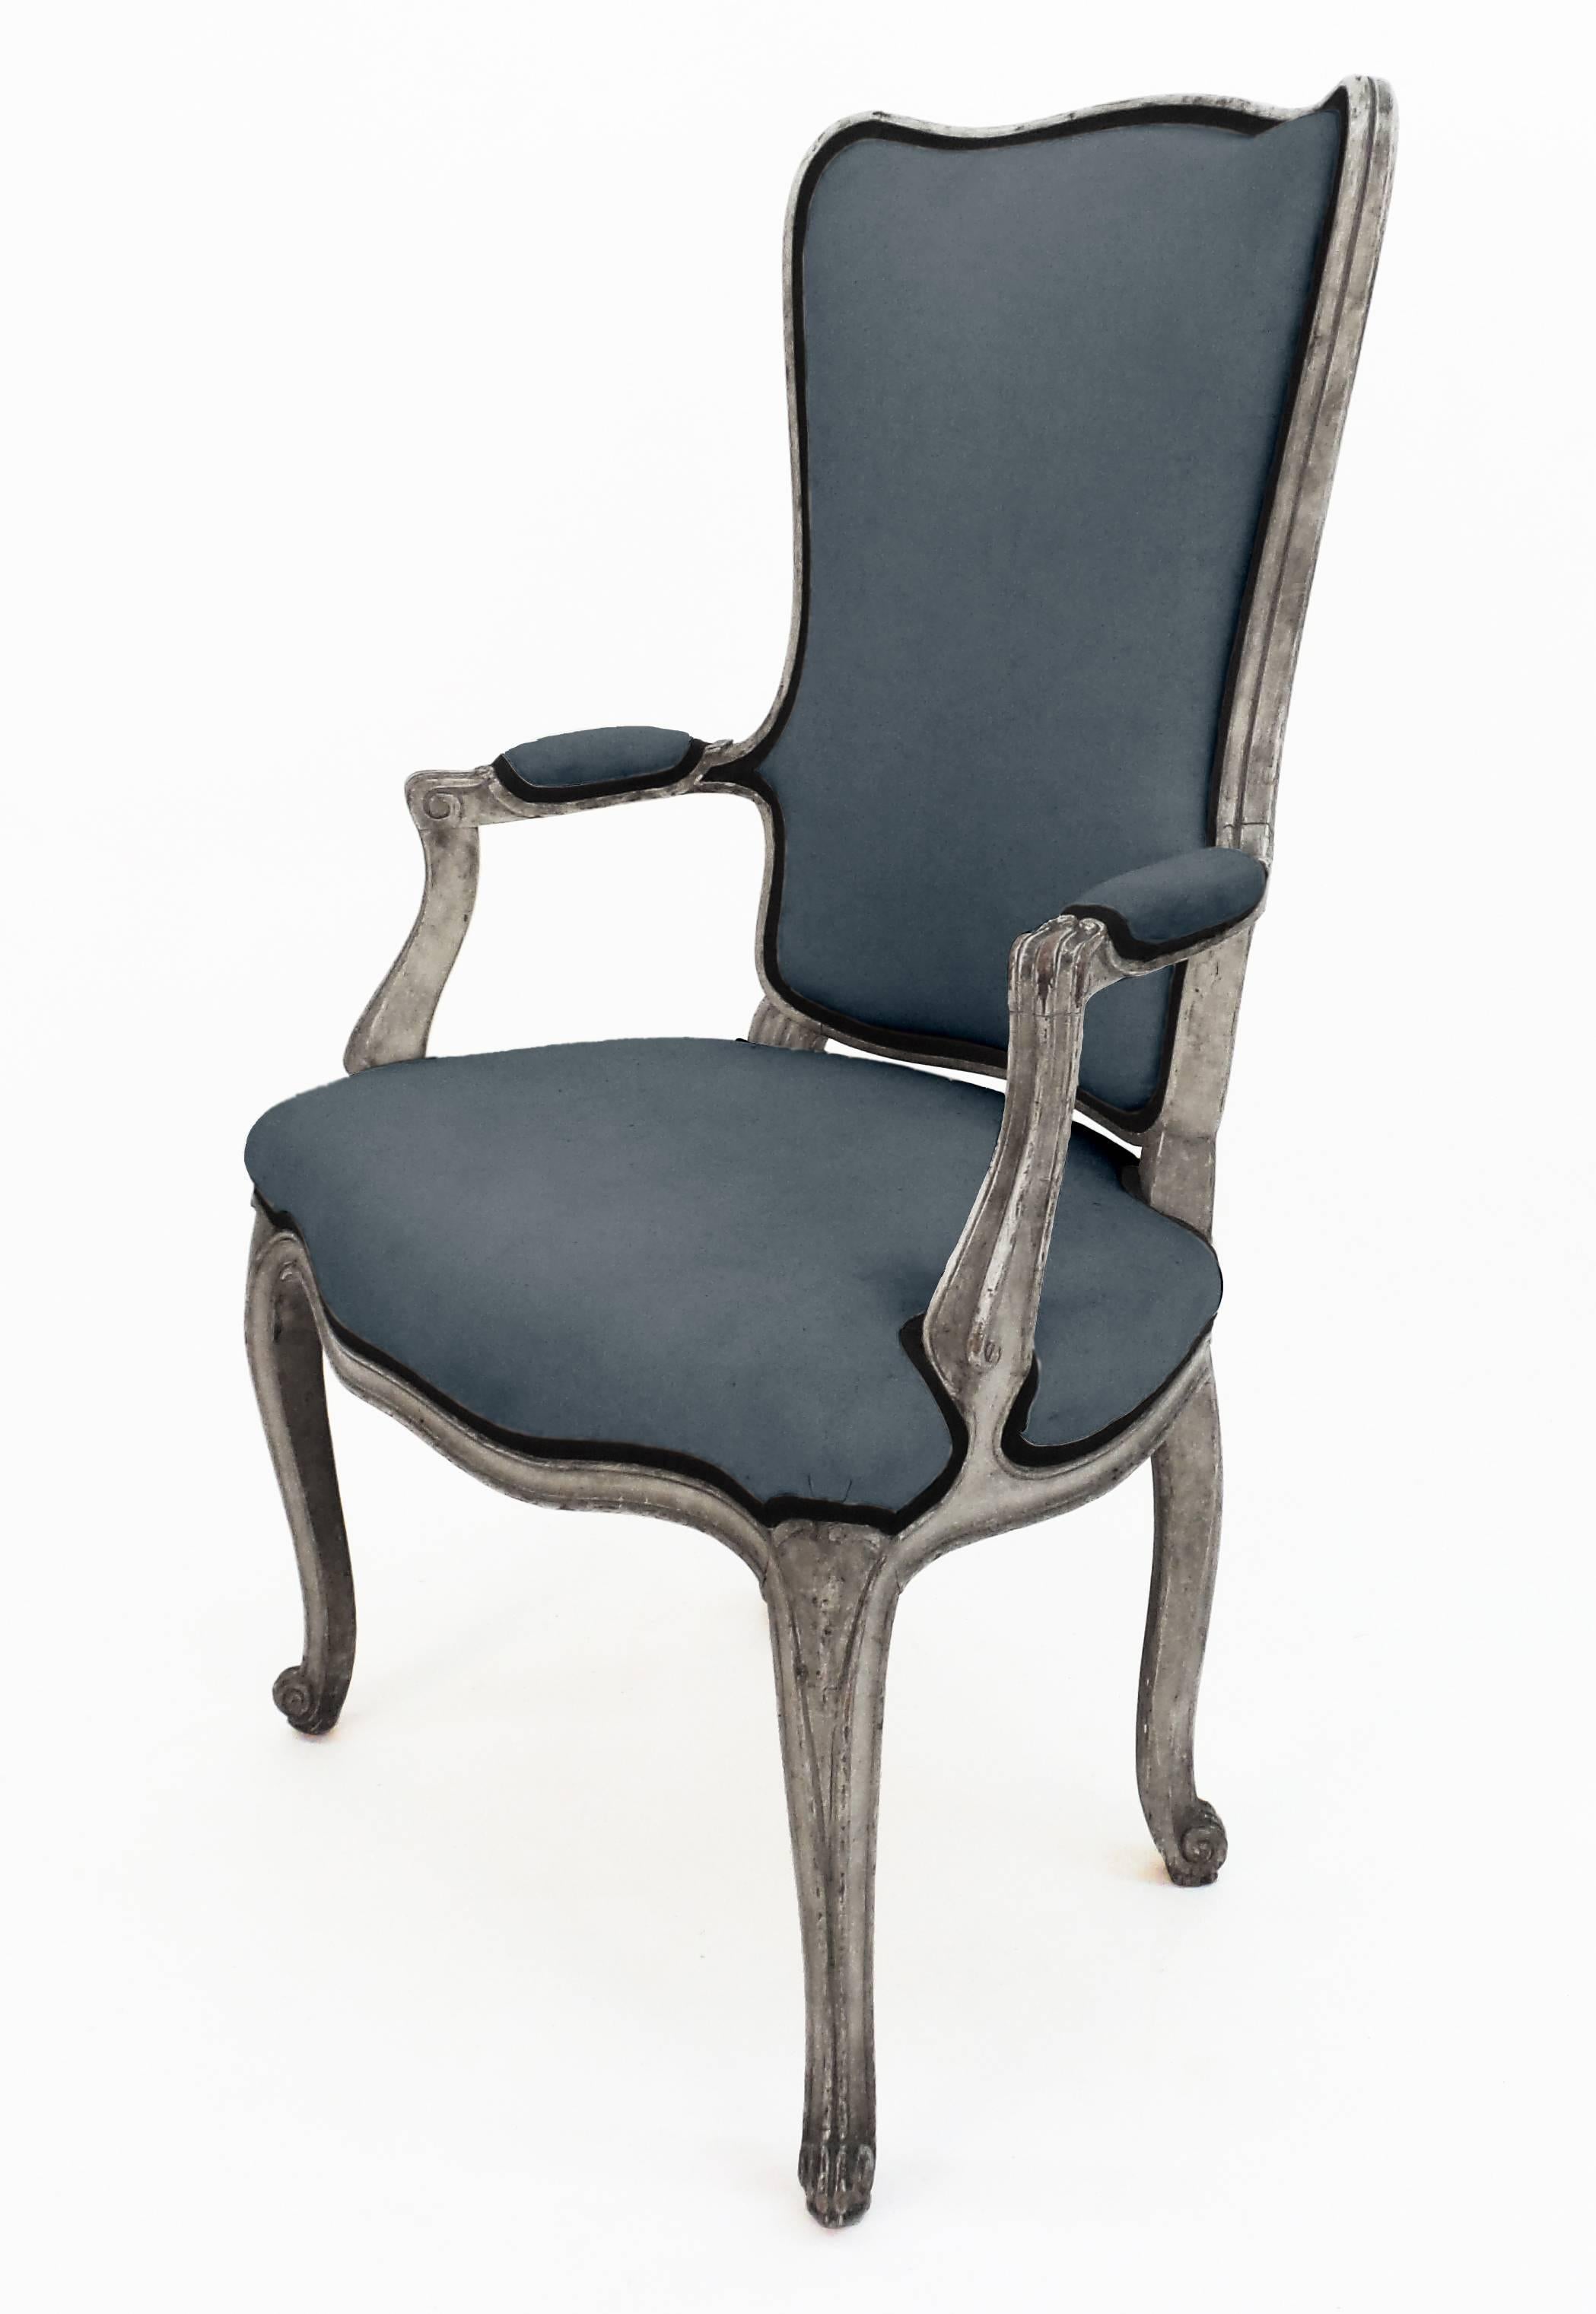 The Beistegui model Louis XV style high back open-arm dining chair, based on Carlos de Beistegui's original and depicted in the painting of Mr, Beistegui's apartment by Jeremiah Goodman. Custom upholstery and finish options available on request.